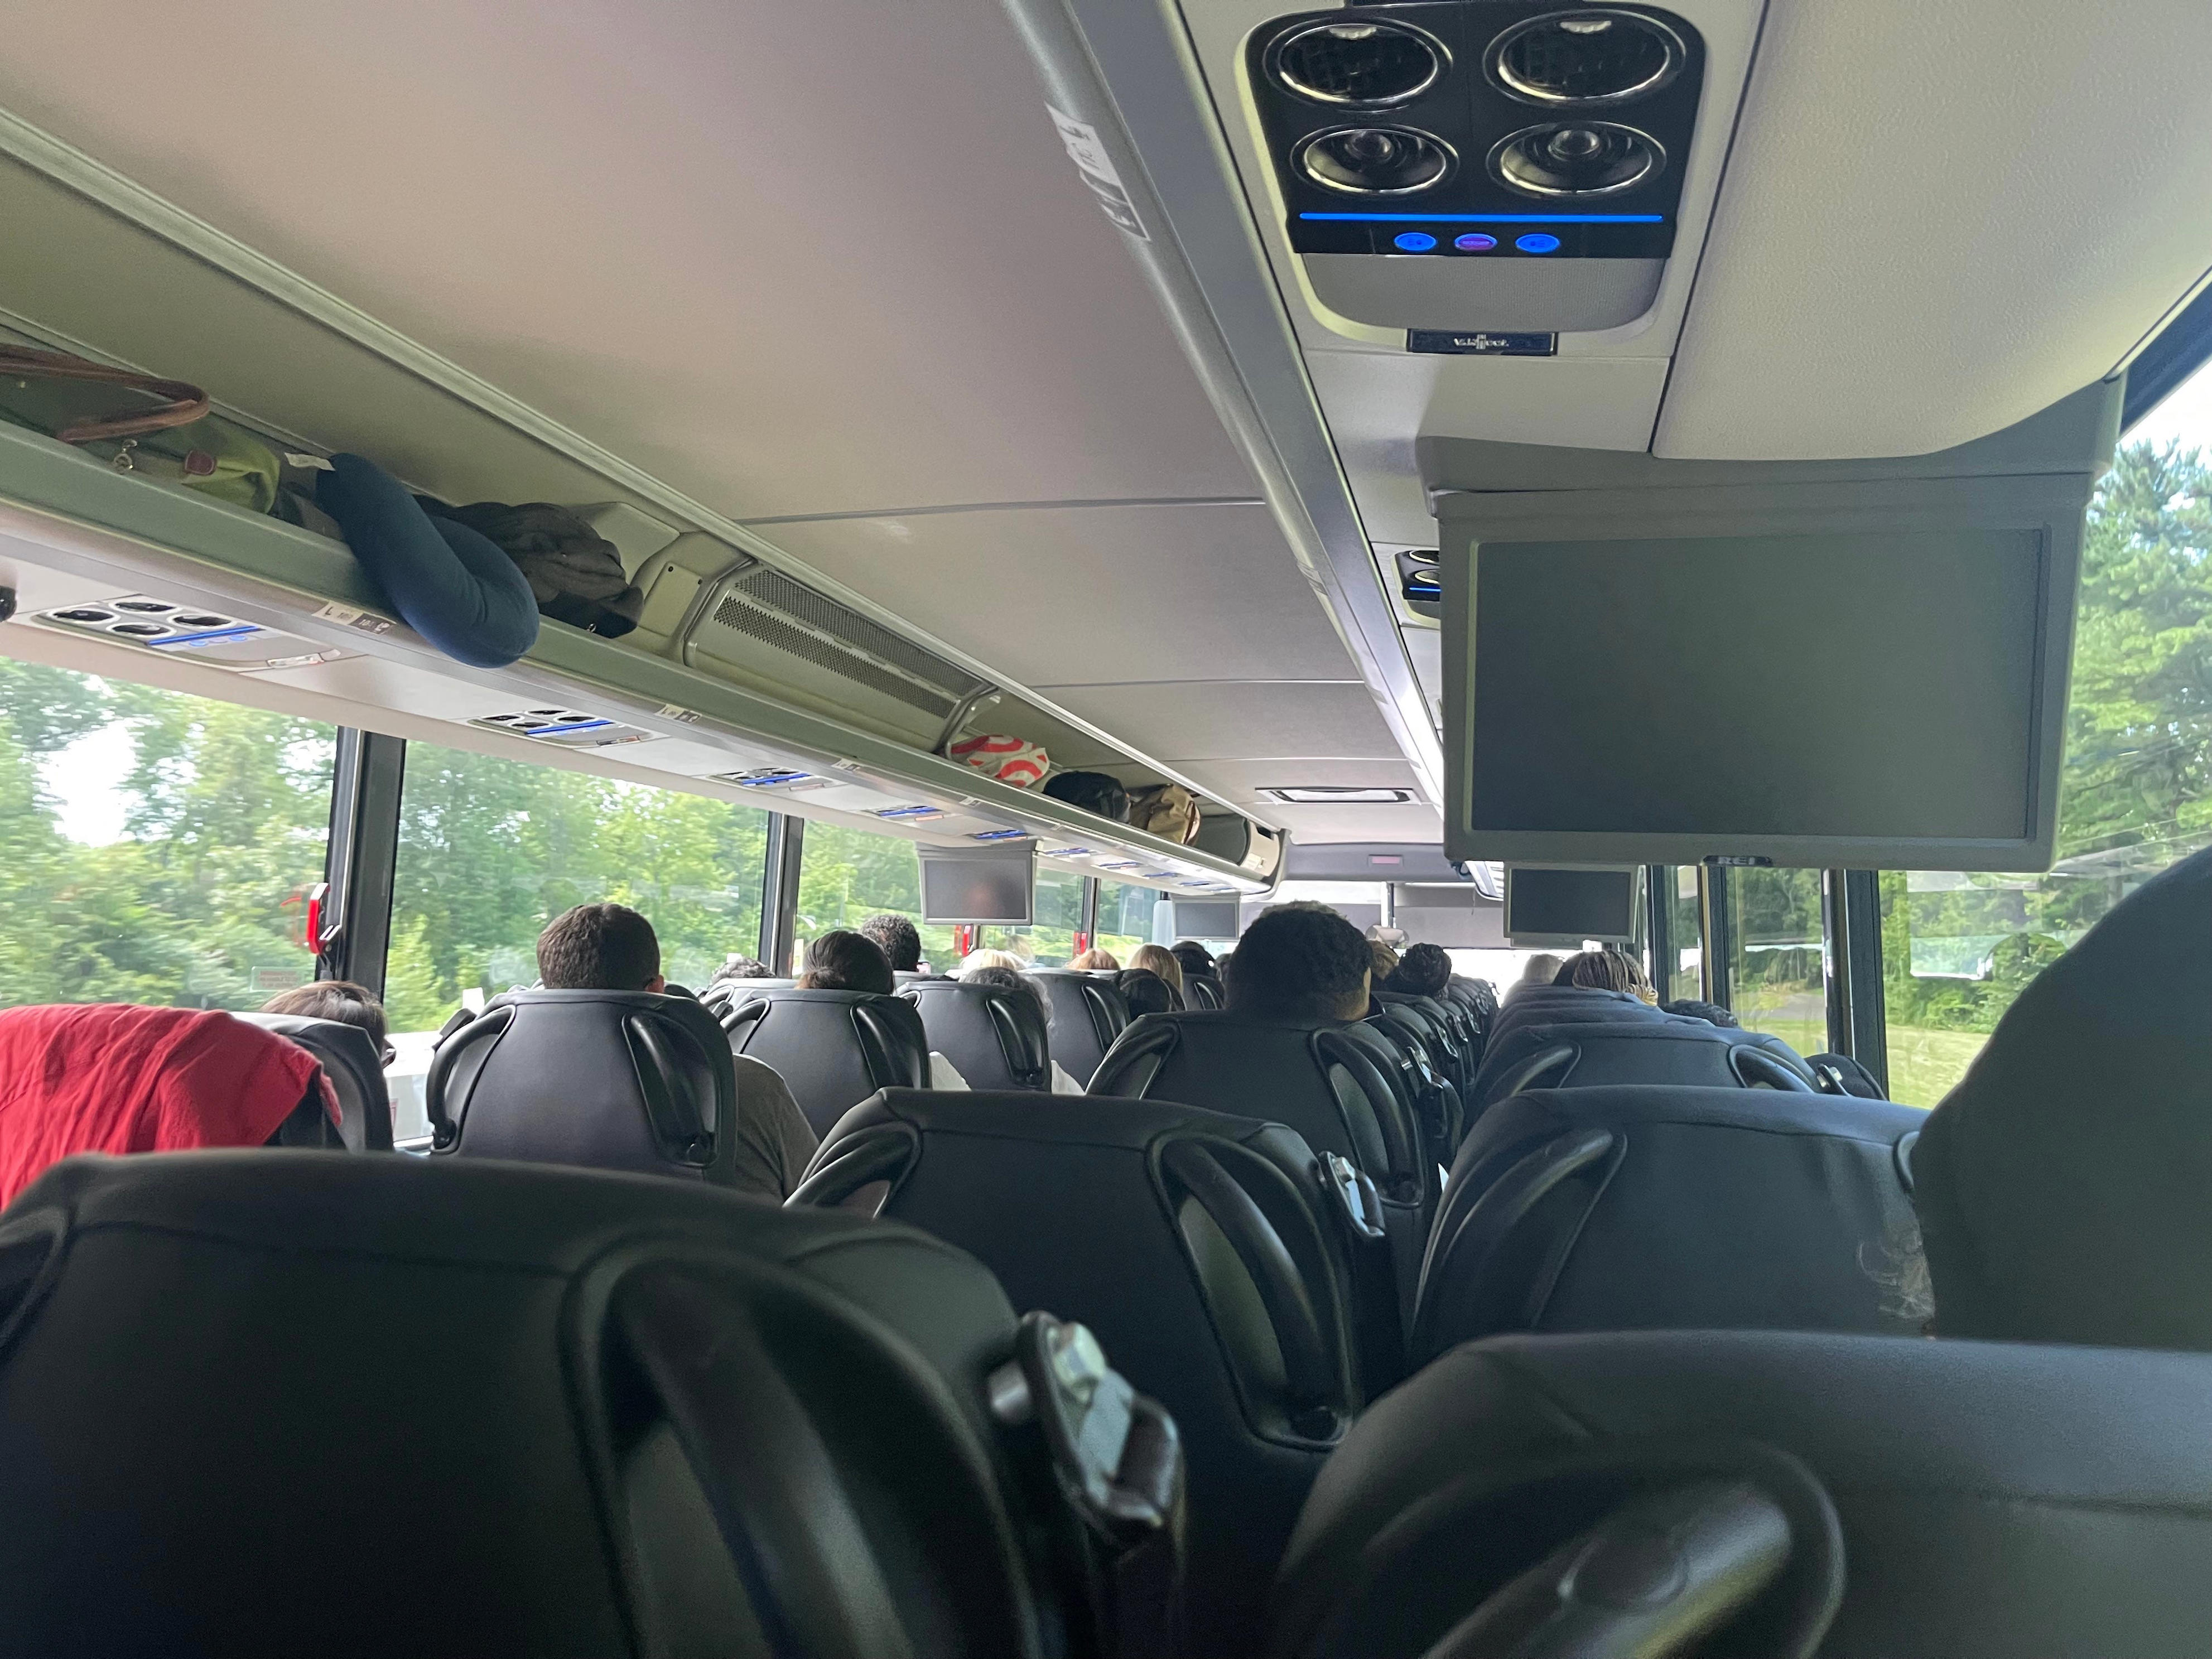 <p>Both buses had a similar seat configuration, with two seats on either side of the aisle.</p><p>But on the FlixBus, there were a lot more seats, leaving less room in between each row. </p>